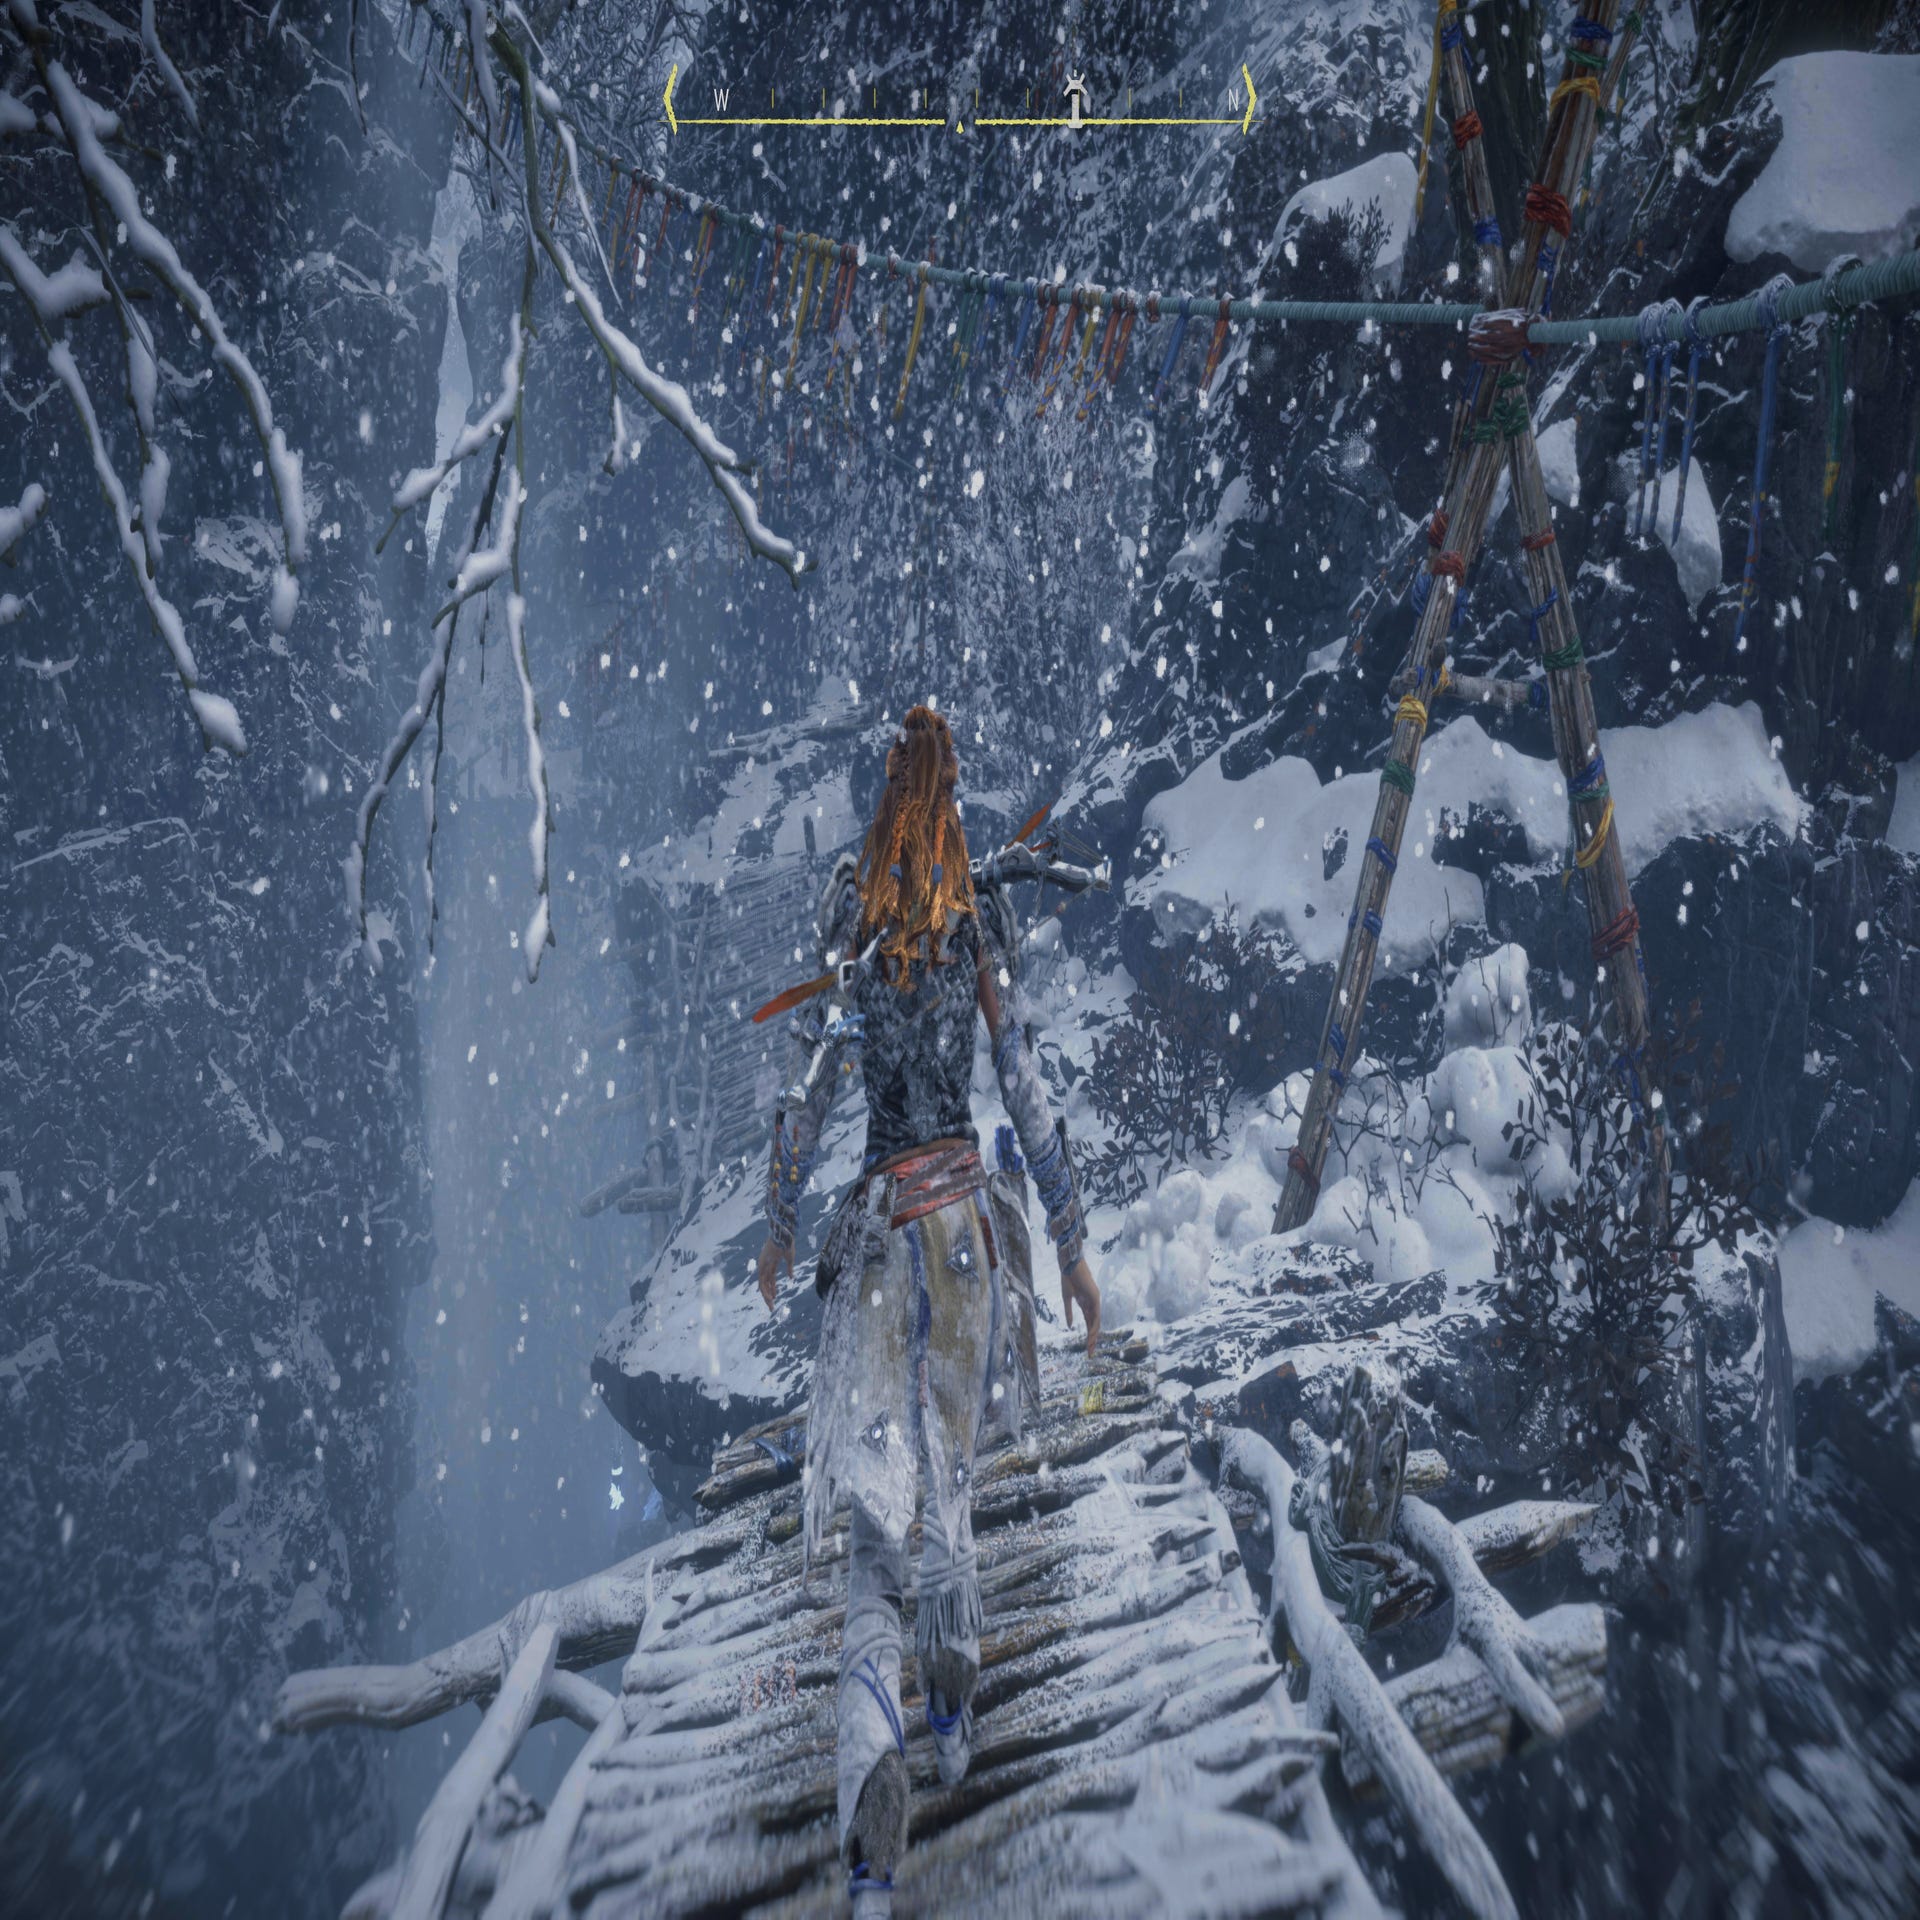 Horizon Zero Dawn The Frozen Wilds Is One Of The Most Impressive 4K HDR  Experiences Available; Tech Analysis Shared